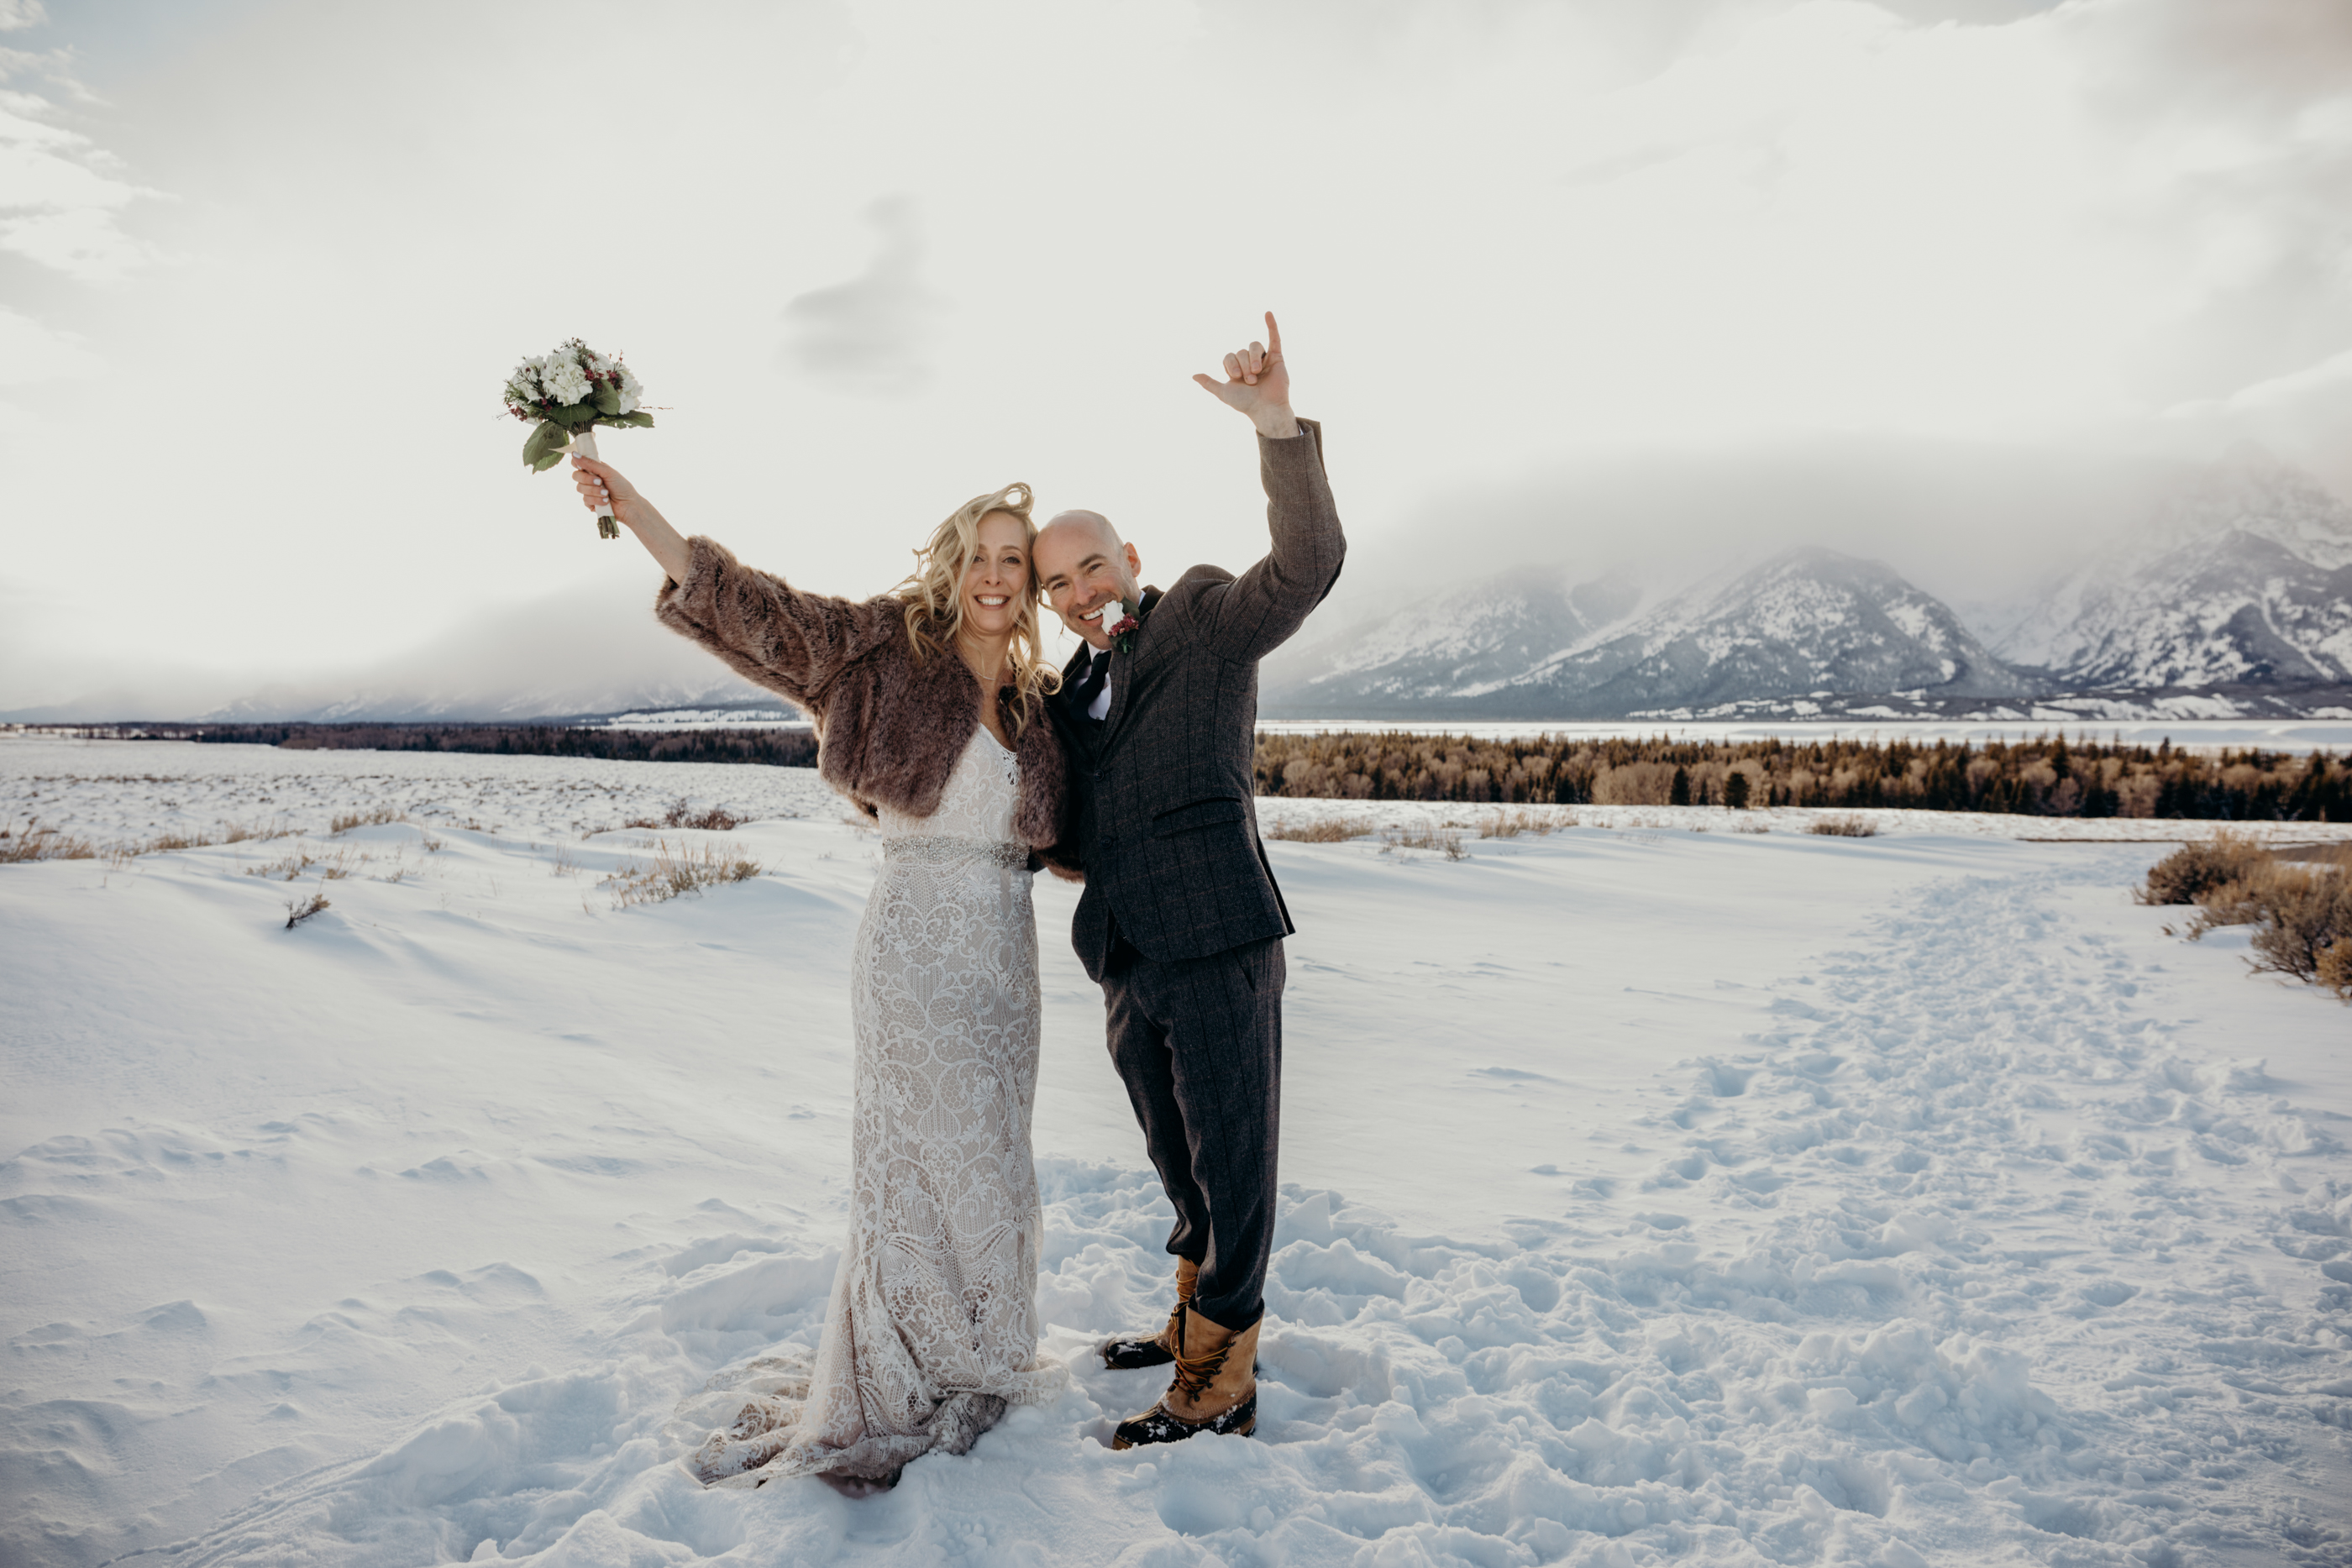 Newly married couple wearing suit, gown and fur coat raise their arms in the air in celebration during their elopement at Grand Teton National Park